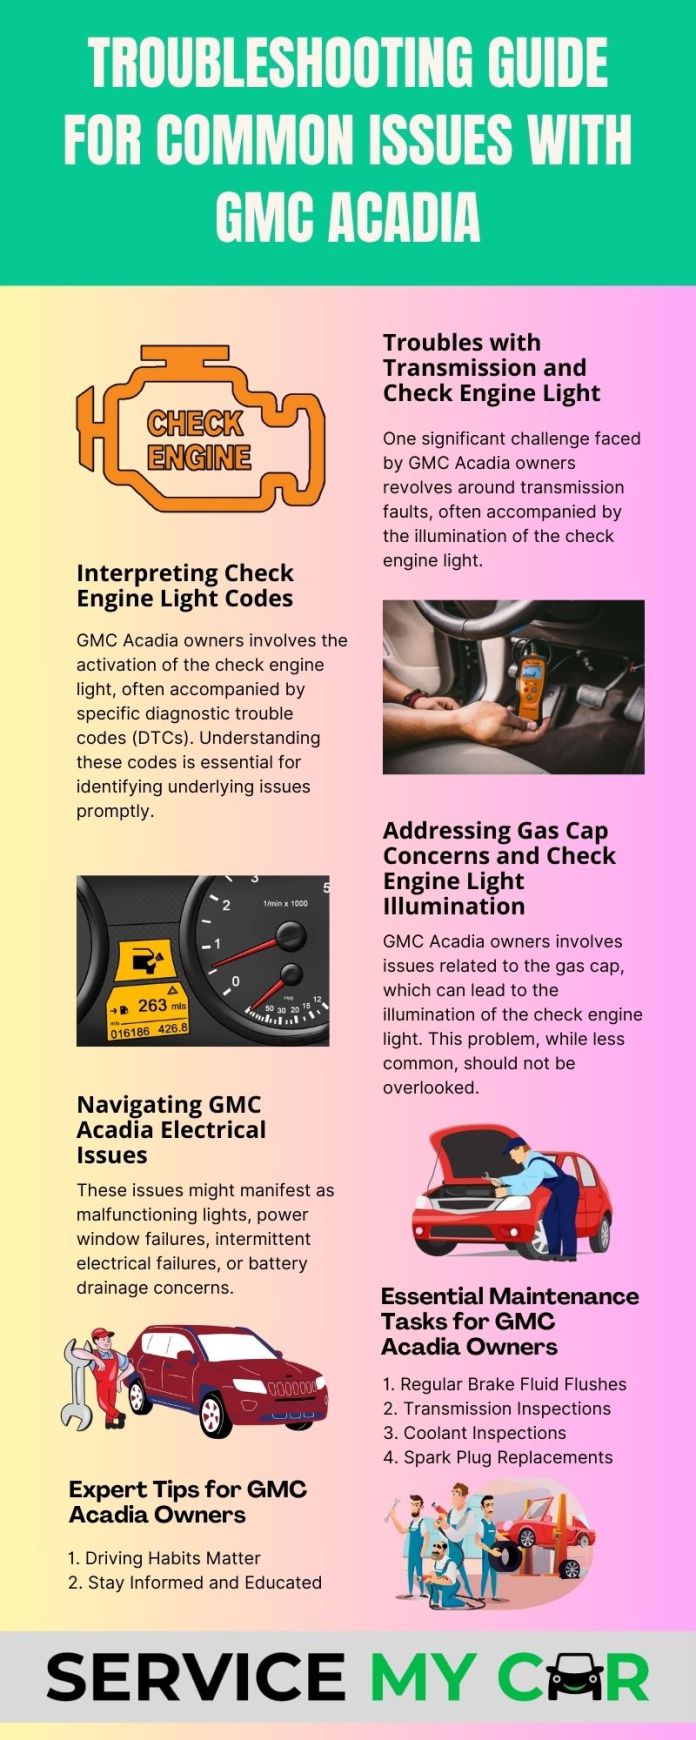 Troubleshooting Guide for Common Issues with GMC Acadia - TROUBLESHOOTING GUIDE
FOR COMMON ISSUES WITH

 

Troubles with
Transmission and
Check Engine Light

CHIECIK One sient chotlrge faced
ENGINE by GMC Acadia owners

revolves around transmission
faults, often accompanied by
the illumination of the check

Interpreting Check engine light

Engine Light Codes

GMC Acadia owners involves the
activation of the check engine
light, often accompanied by
specific diagnostic trouble
codes (DTCs). Understanding
these codes is essential for
identifying underlying issues
promptly.

 

Addressing Gas Cap
Concerns and Check
Engine Light
Illumination

GMC Acadia owners involves
issues related 10 the gas cap,
which can lead to the
illumination of the check engine
light. This problem, while less
common, should not be

 

overlooked.

Navigating GMC

Acadia Electrical

Issues

These issues might manifest as

malfunctioning lights, power

window failures, intermittent

electrical failures, or battery

drainage concerns. Essential Maintenance
Tasks for GMC
Acadia Owners

1. Regular Brake Fluid Flushes
2. Transmission Inspections.
3. Coolant Inspections

4. Spark Plug Replacements.

 

Expert Tips for GMC
Acadia Owners

1. Driving Habits Matter
2. Stay Informed and Educated

SERVICE MY CmR